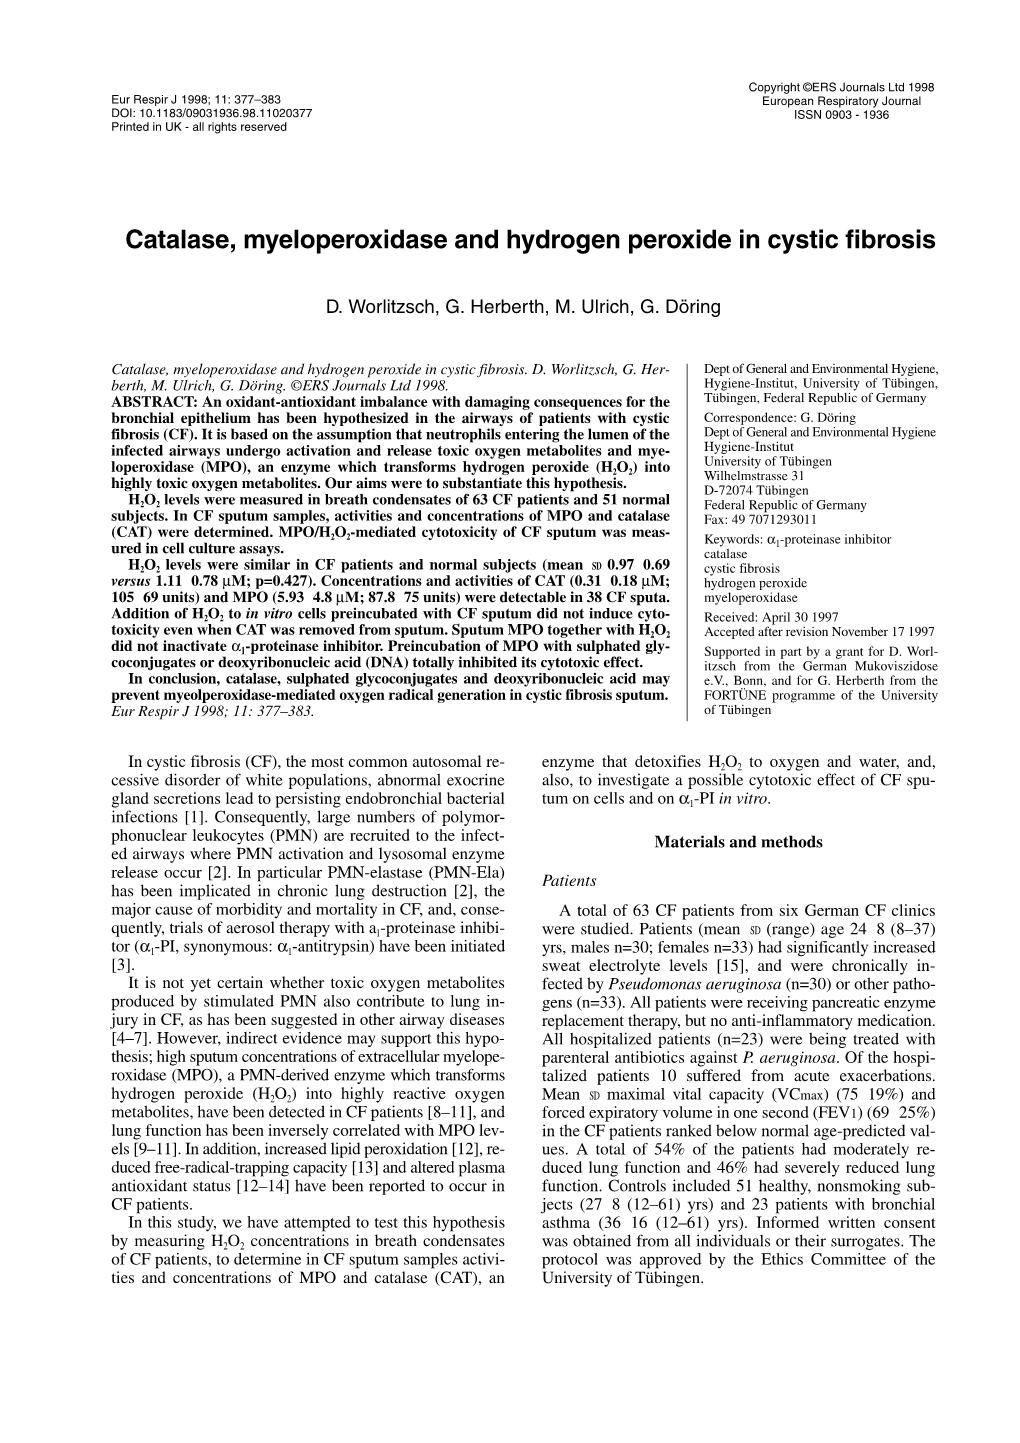 Catalase, Myeloperoxidase and Hydrogen Peroxide in Cystic Fibrosis